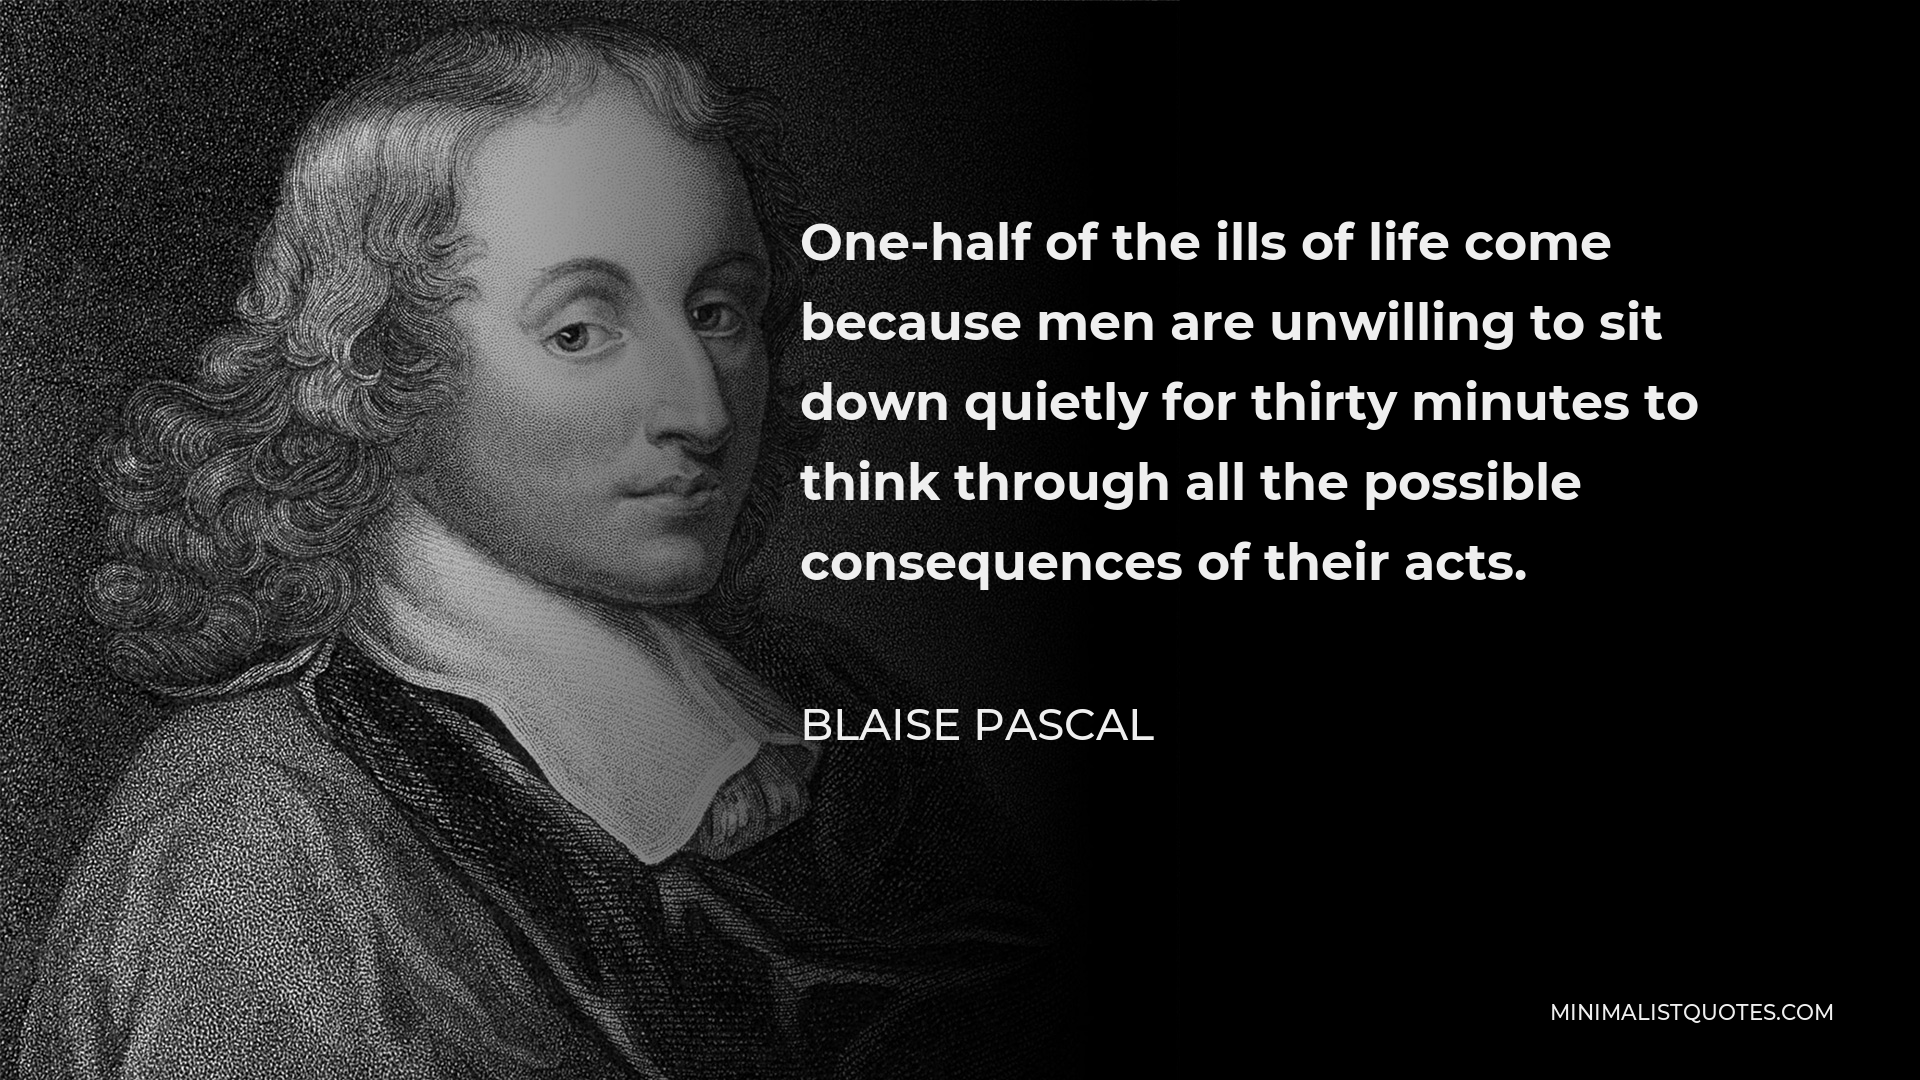 Blaise Pascal Quote - One-half of the ills of life come because men are unwilling to sit down quietly for thirty minutes to think through all the possible consequences of their acts.